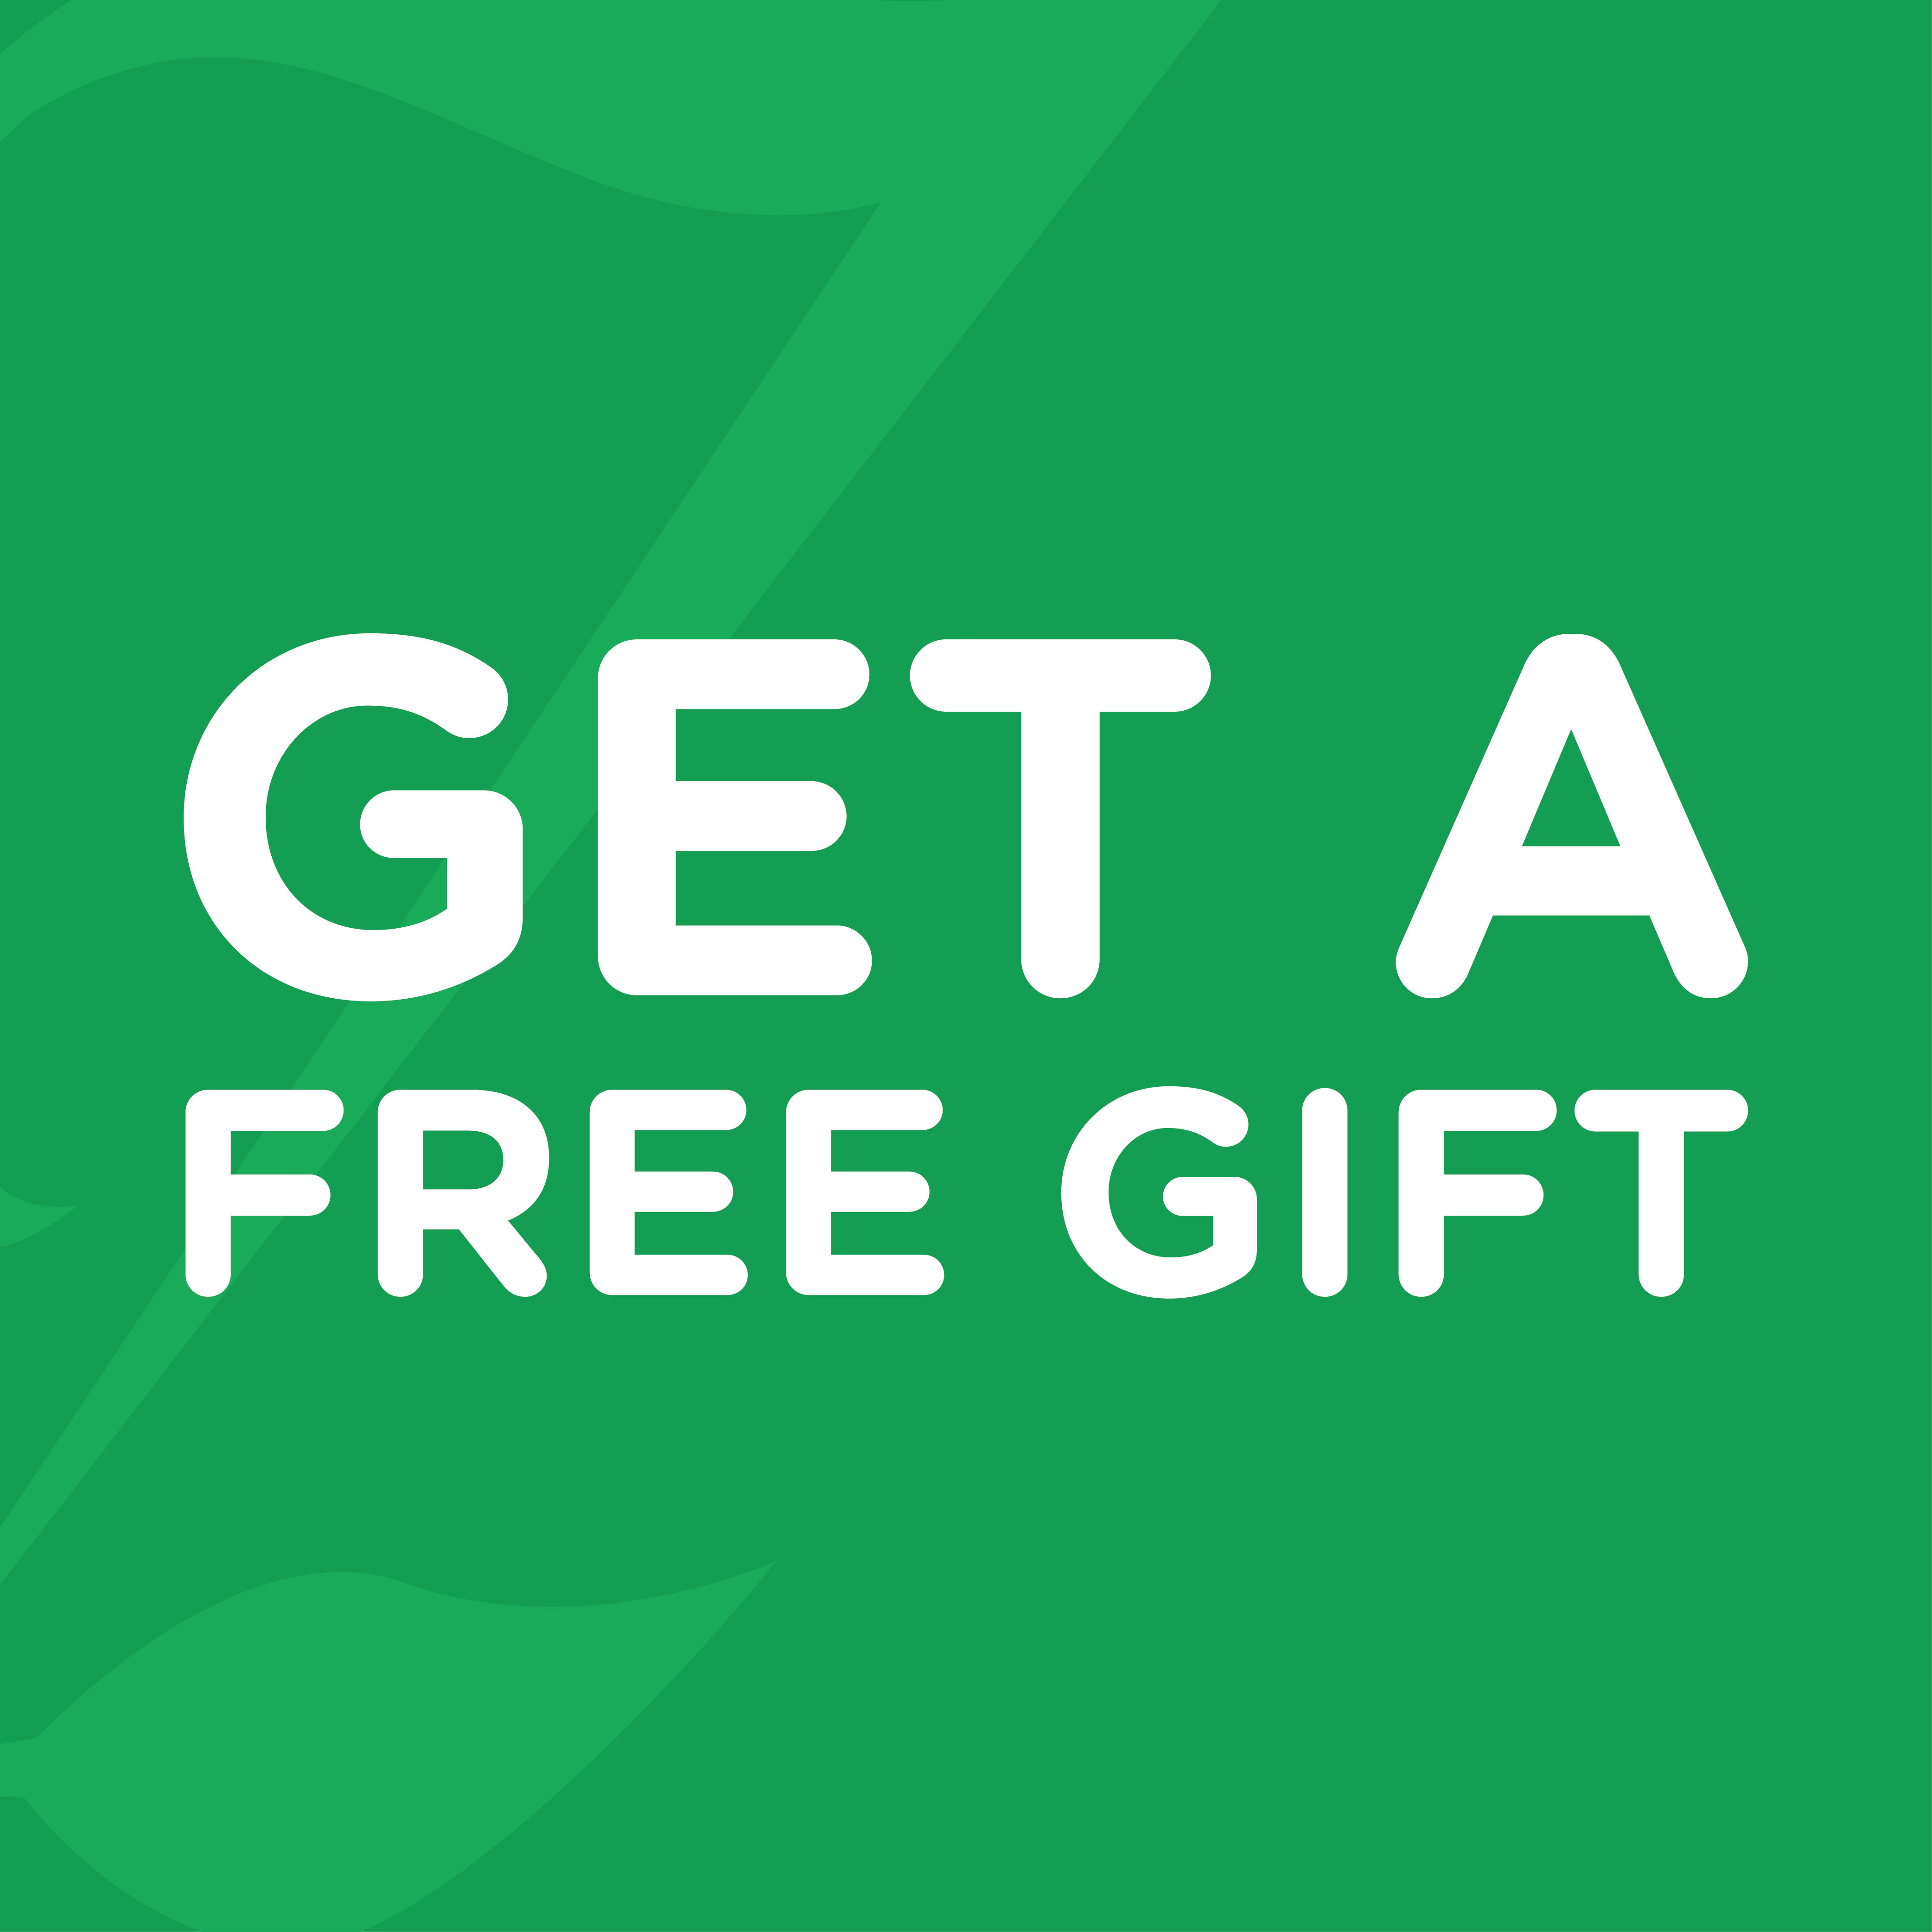 Offer free gift